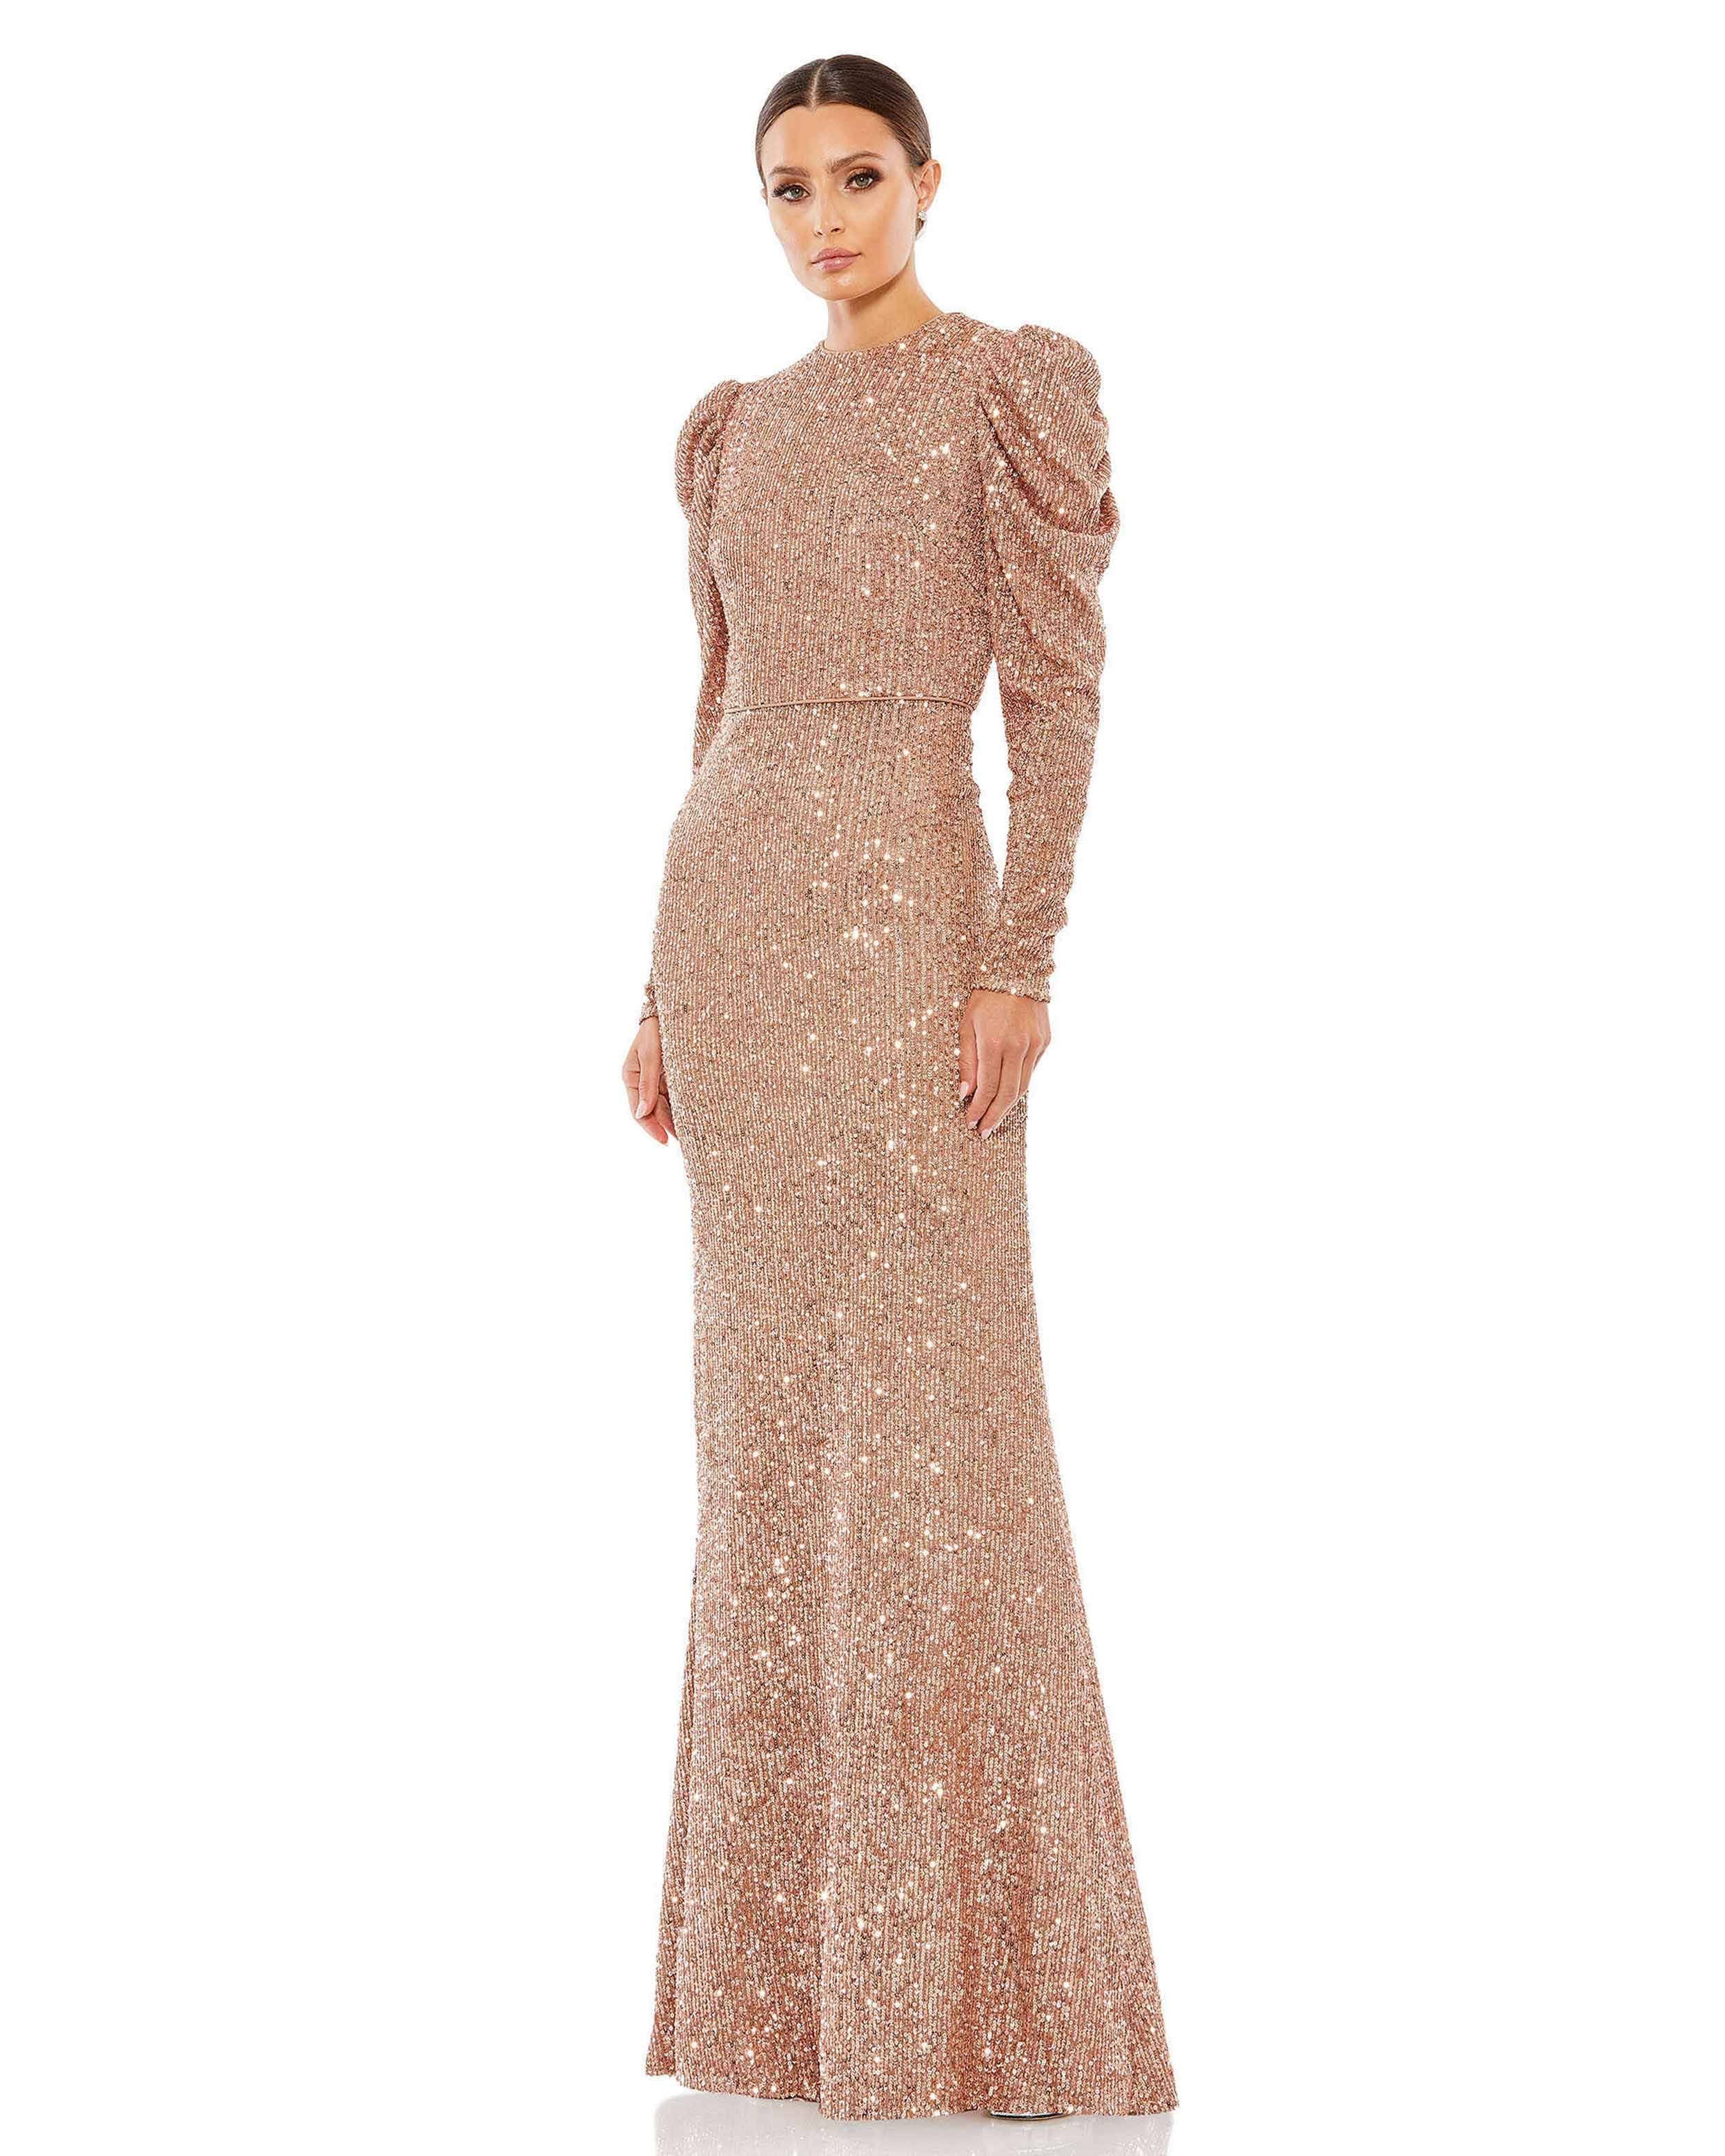 Stunning Long Sleeve High Neck Sequined Gown for Elegant Evenings | Image